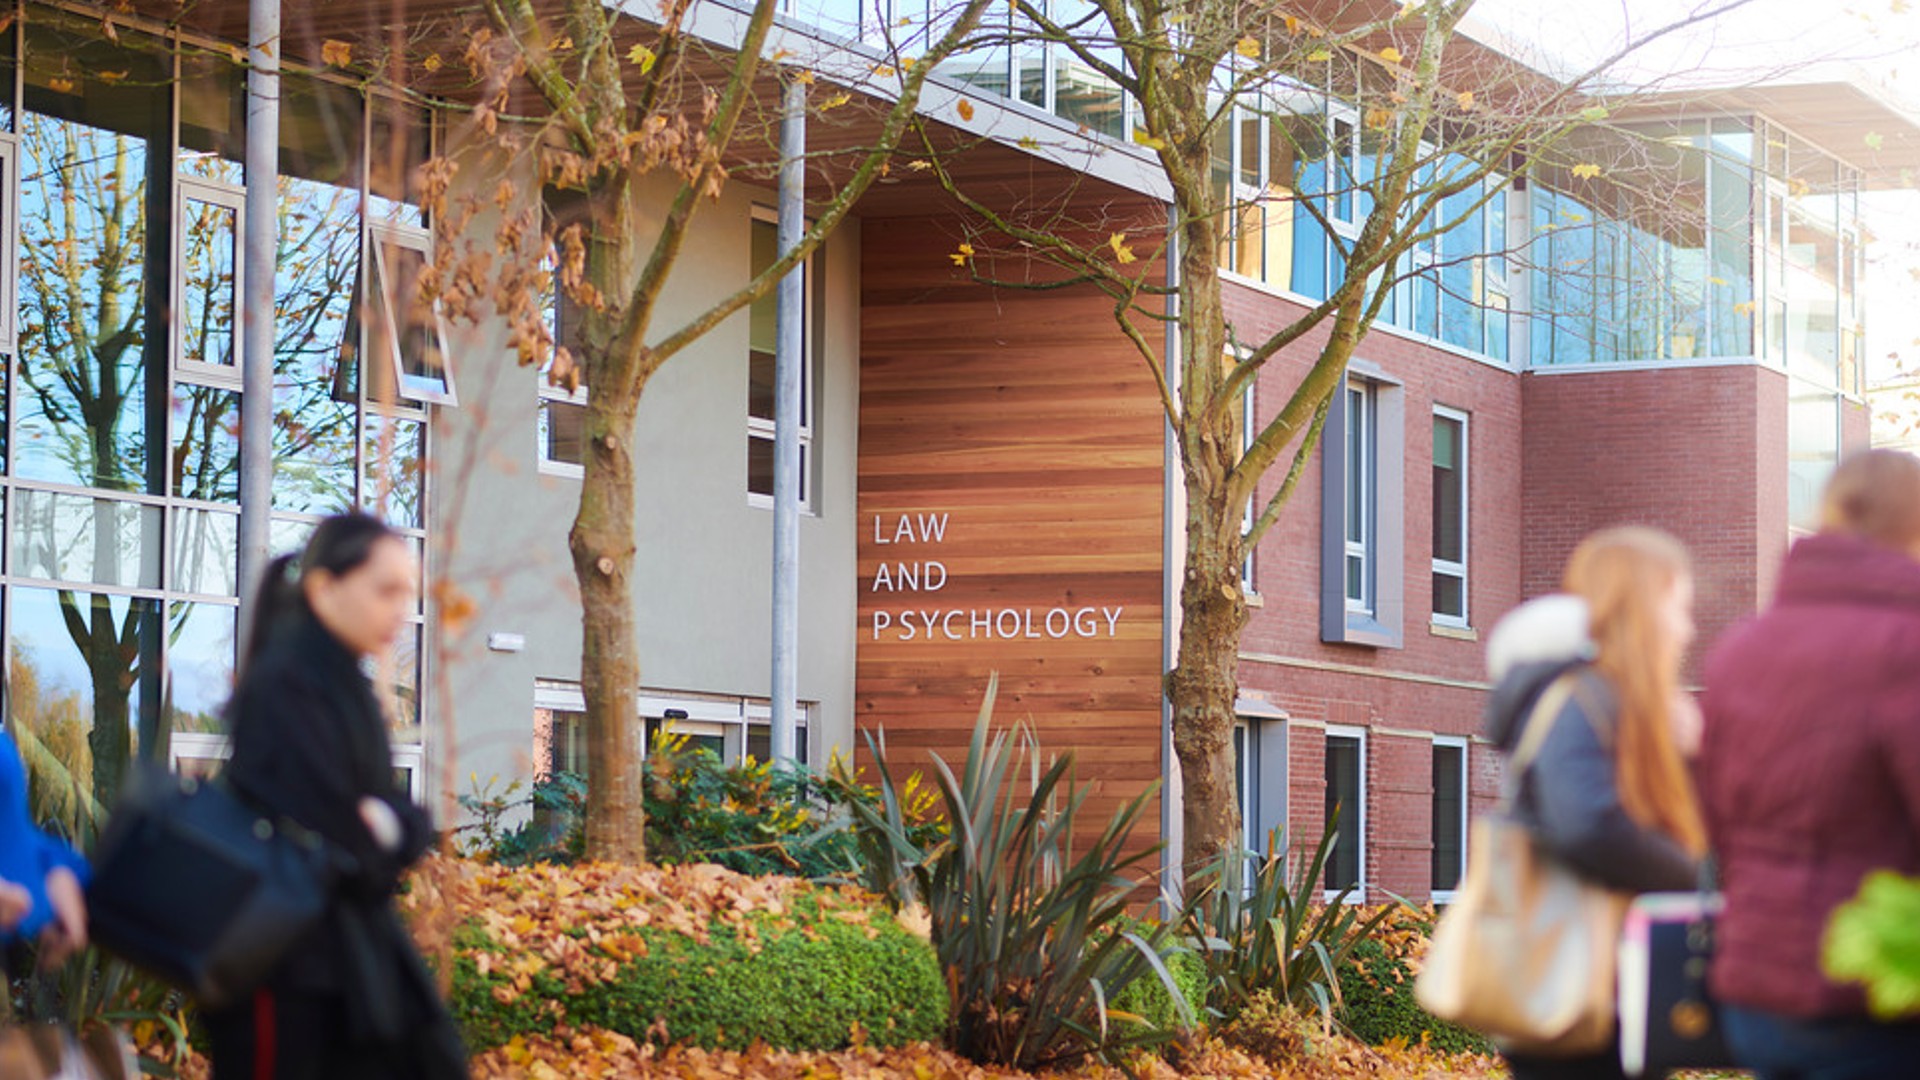 An exterior image of the Law and Psychology building on the Edge Hill University campus.